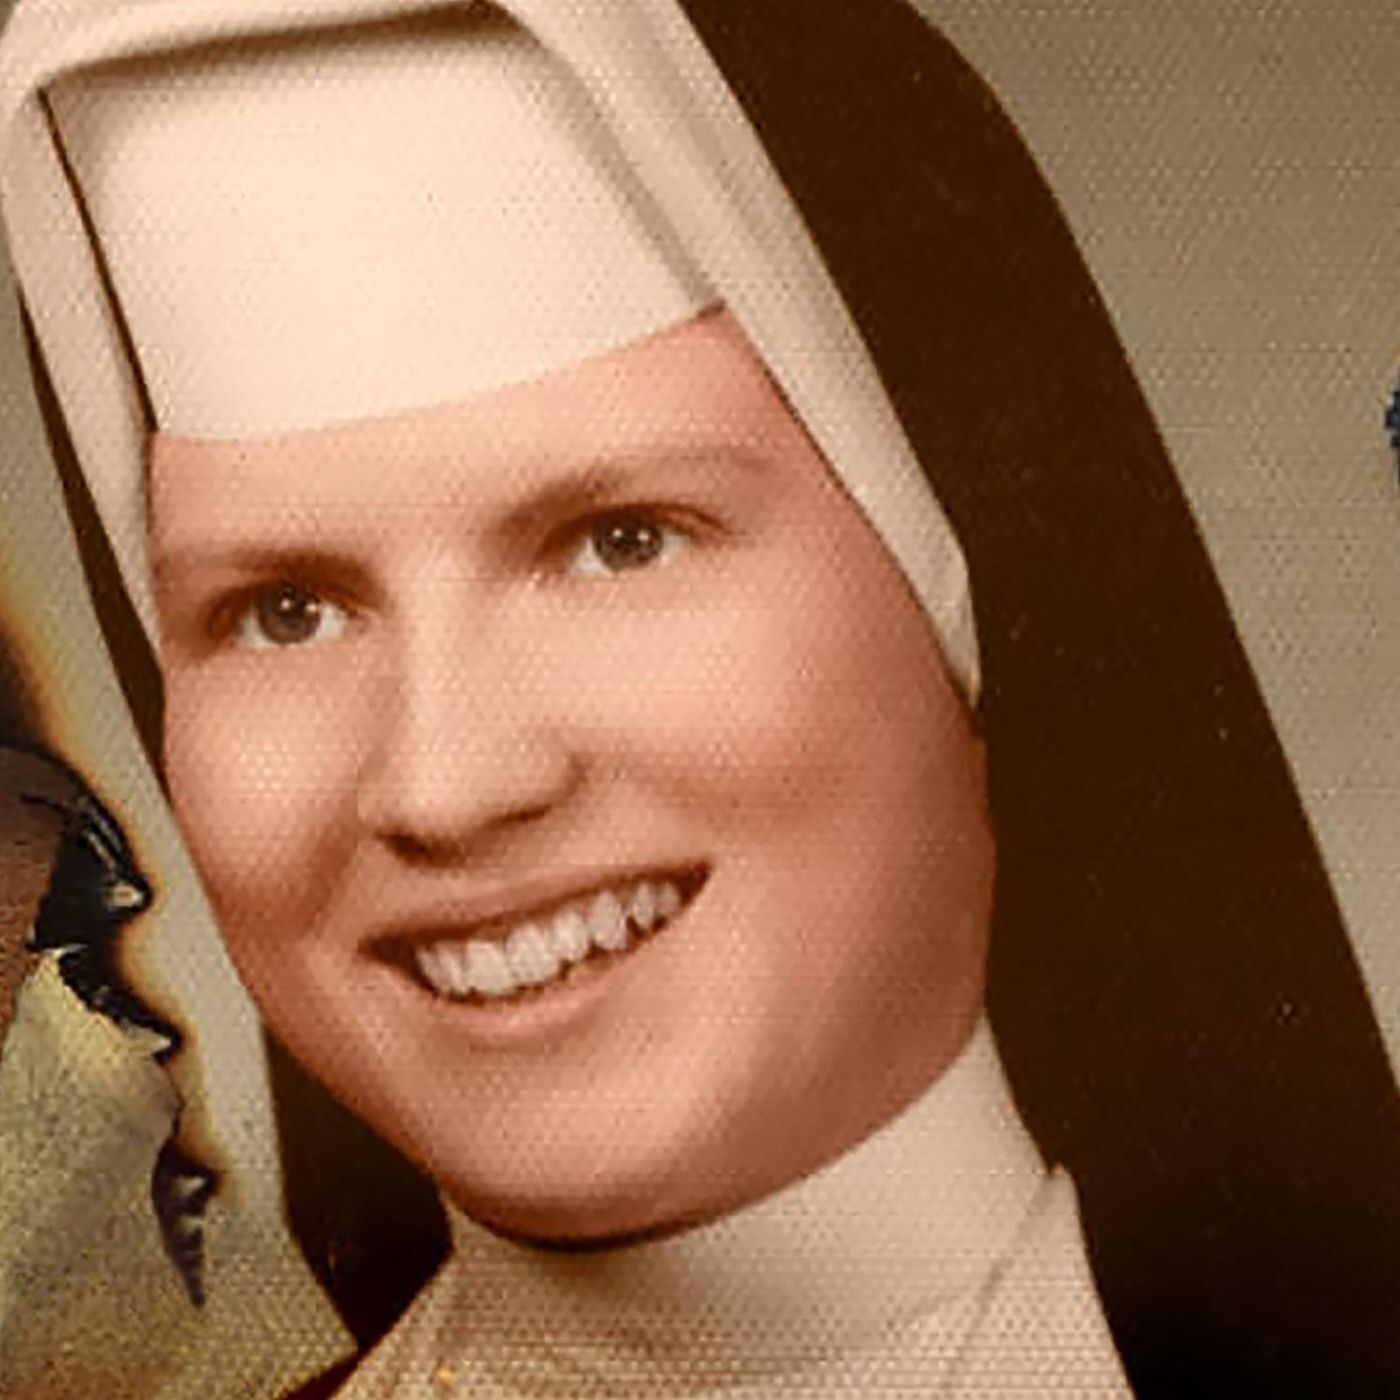 S2 Ep75: Sister Cathy, Live Q&A - Unraveling the Mystery, Part 1